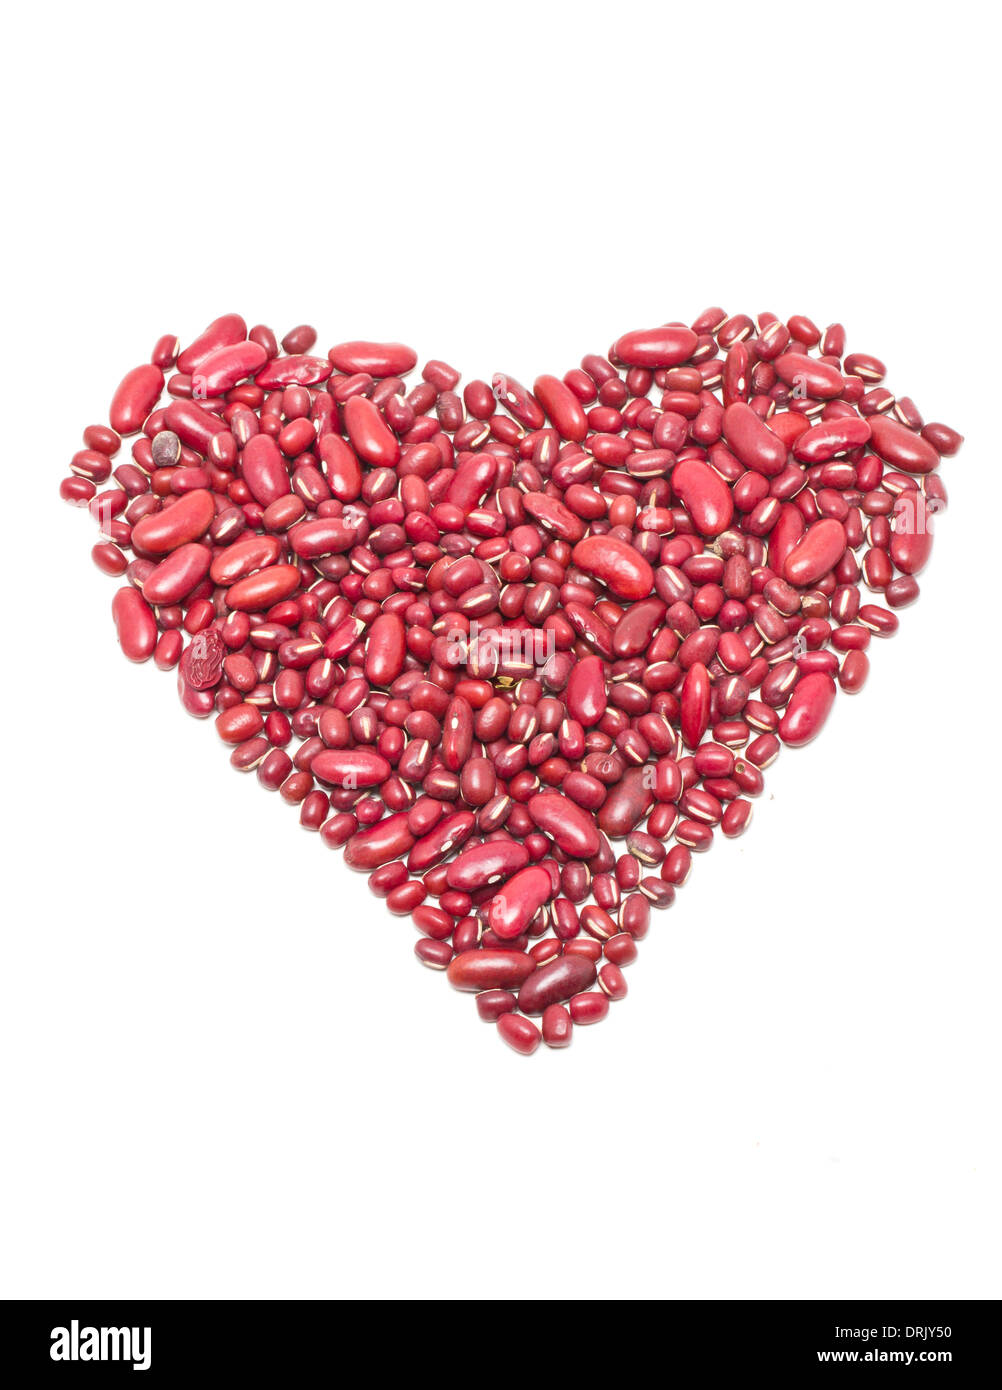 Red kidney beans heart shape isolated on white. Stock Photo